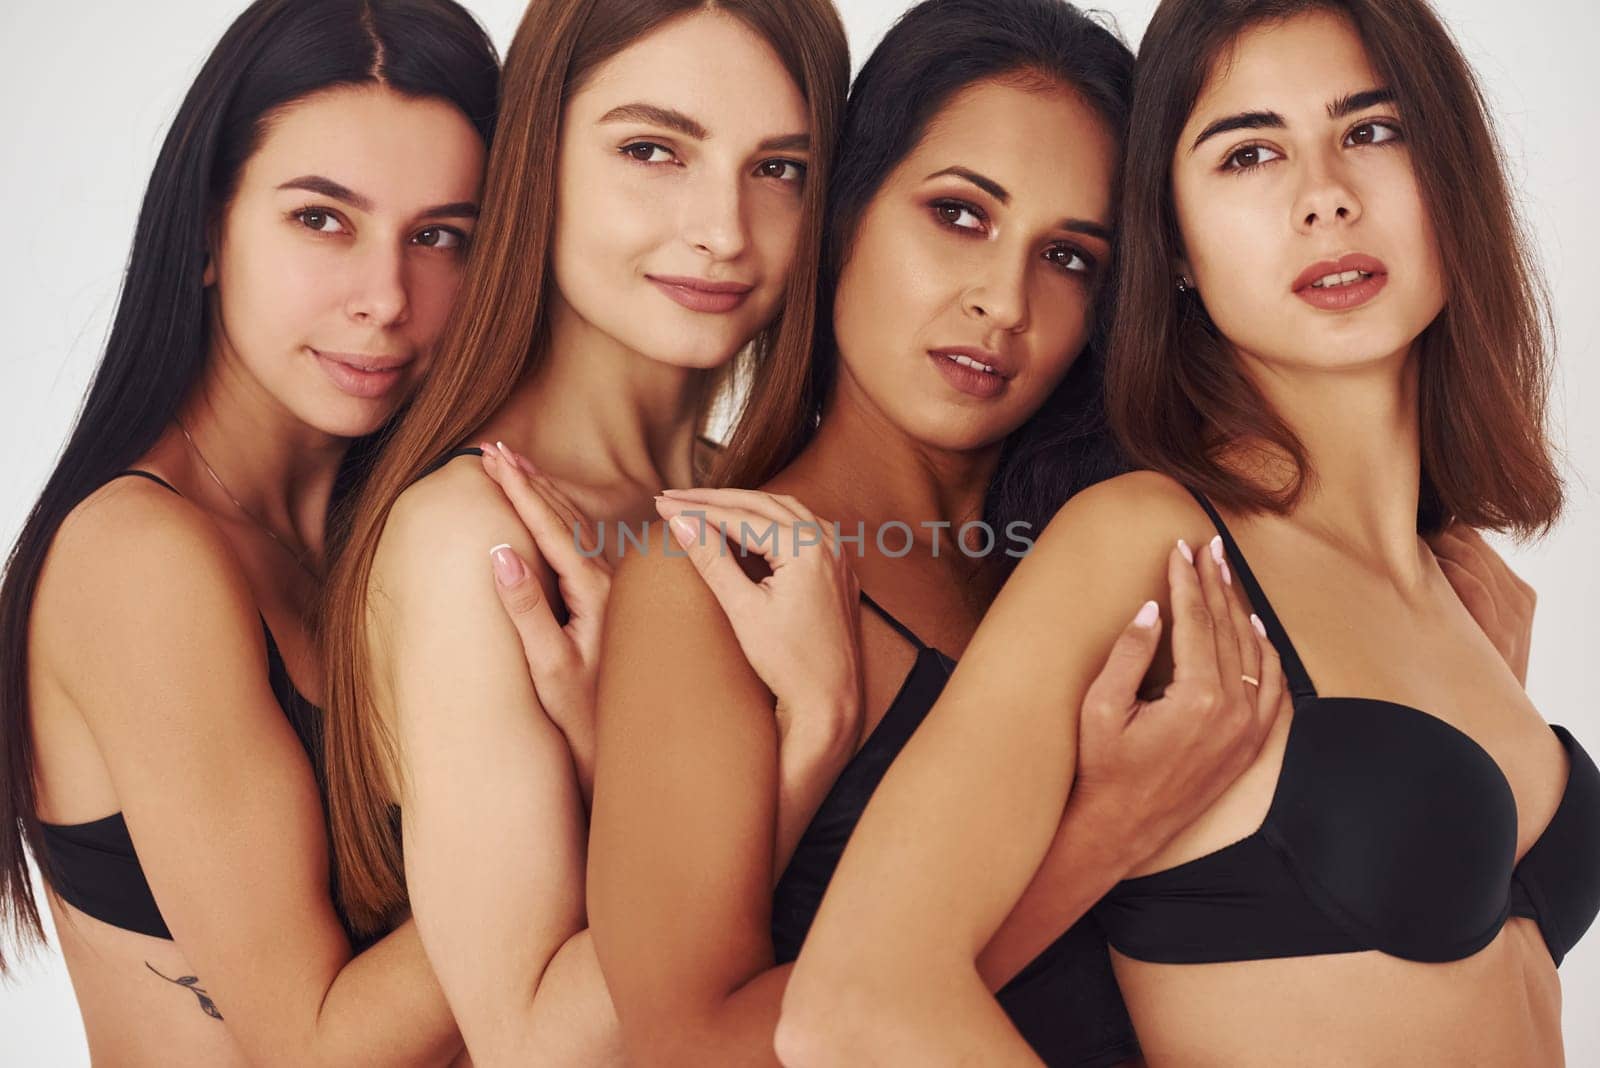 Leaning on each other. Four young women in lingerie together indoors. White background.